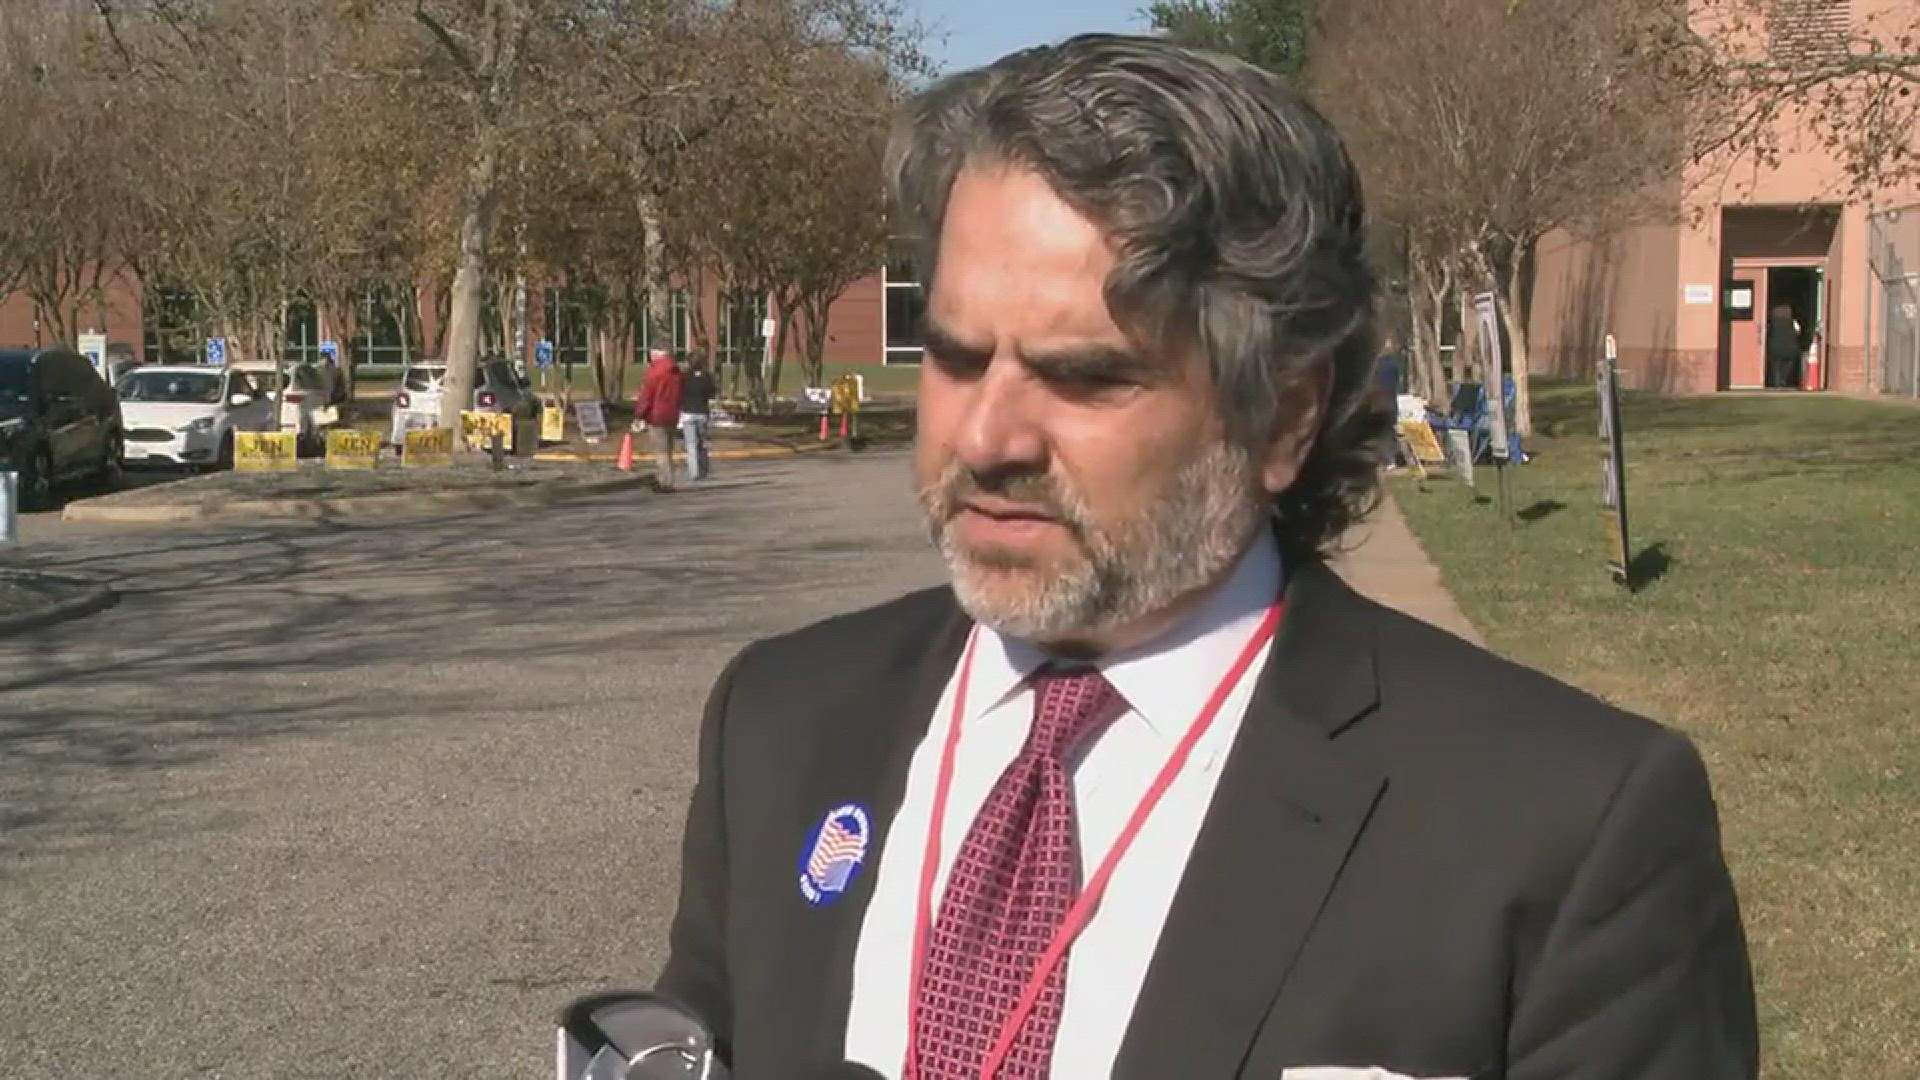 Jeffrey Marks, the chair of the Virginia Beach Electoral Board, spoke with 13News Now.